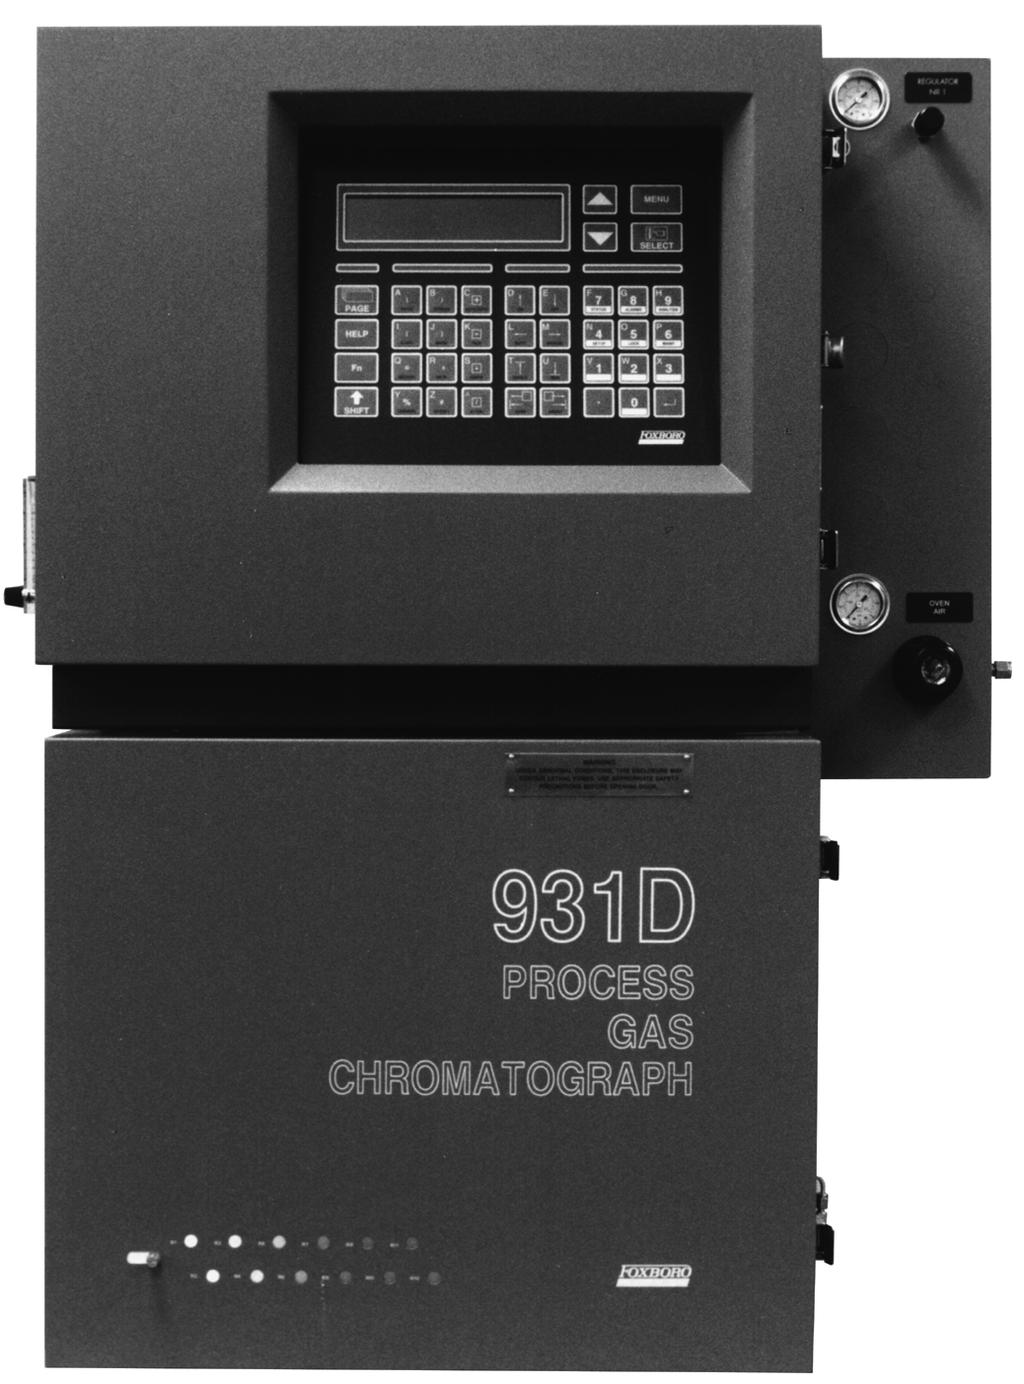 Product Specifications PSS 6-4N1 D 931D Style B Process Gas Chromatograph The new 931D Style B Process Gas Chromatograph continuously analyzes, measures and reports the concentration of components in